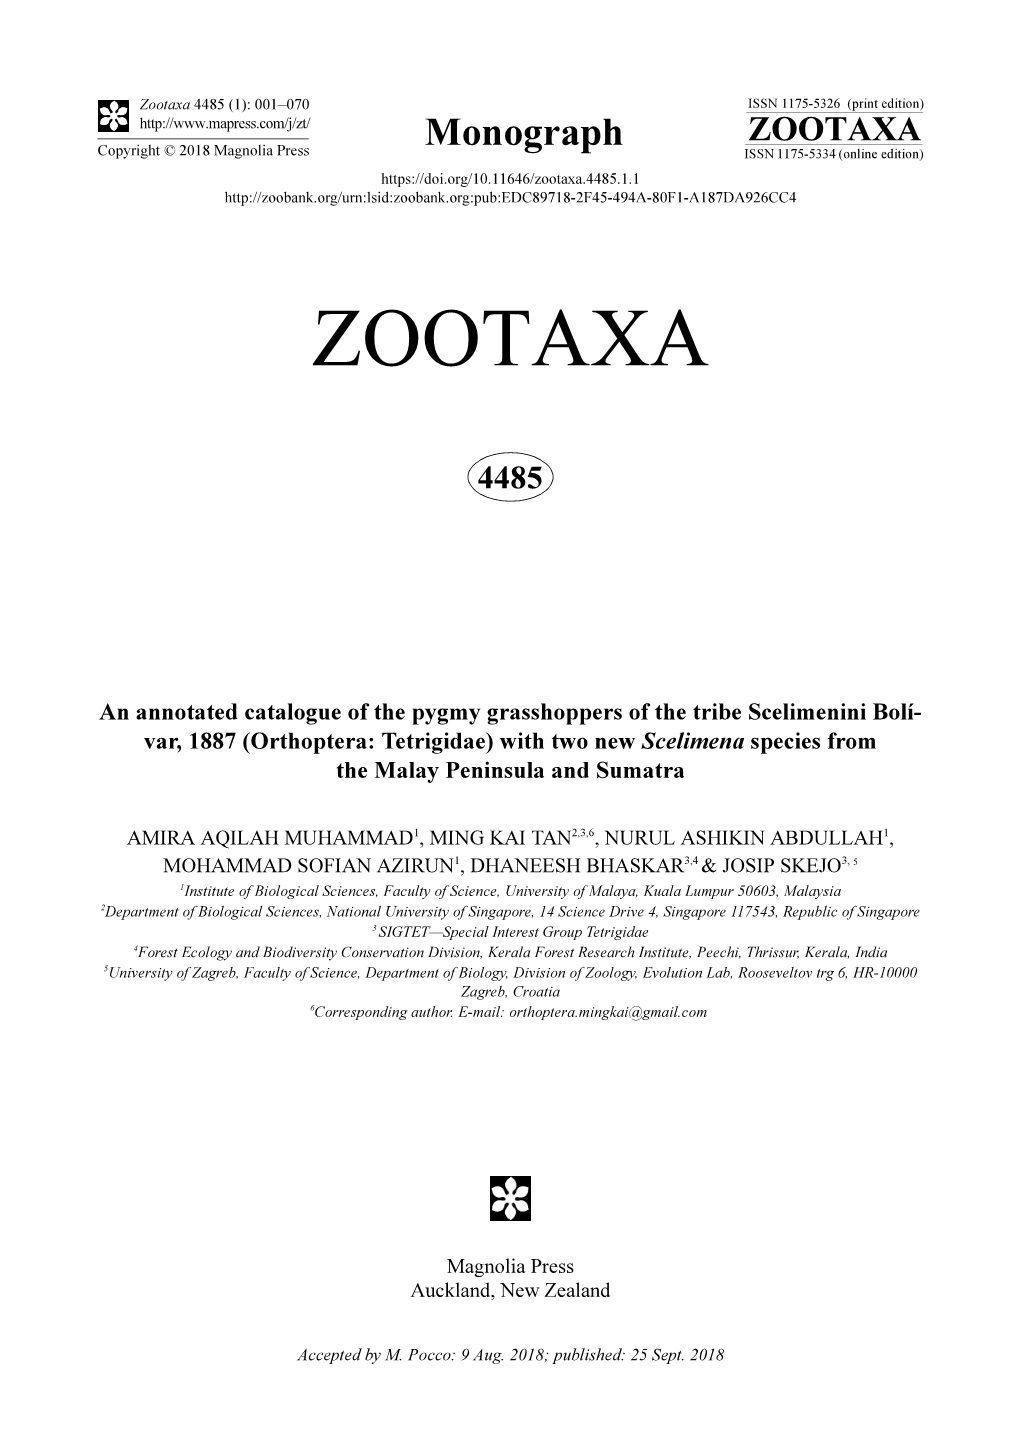 An Annotated Catalogue of the Pygmy Grasshoppers of the Tribe